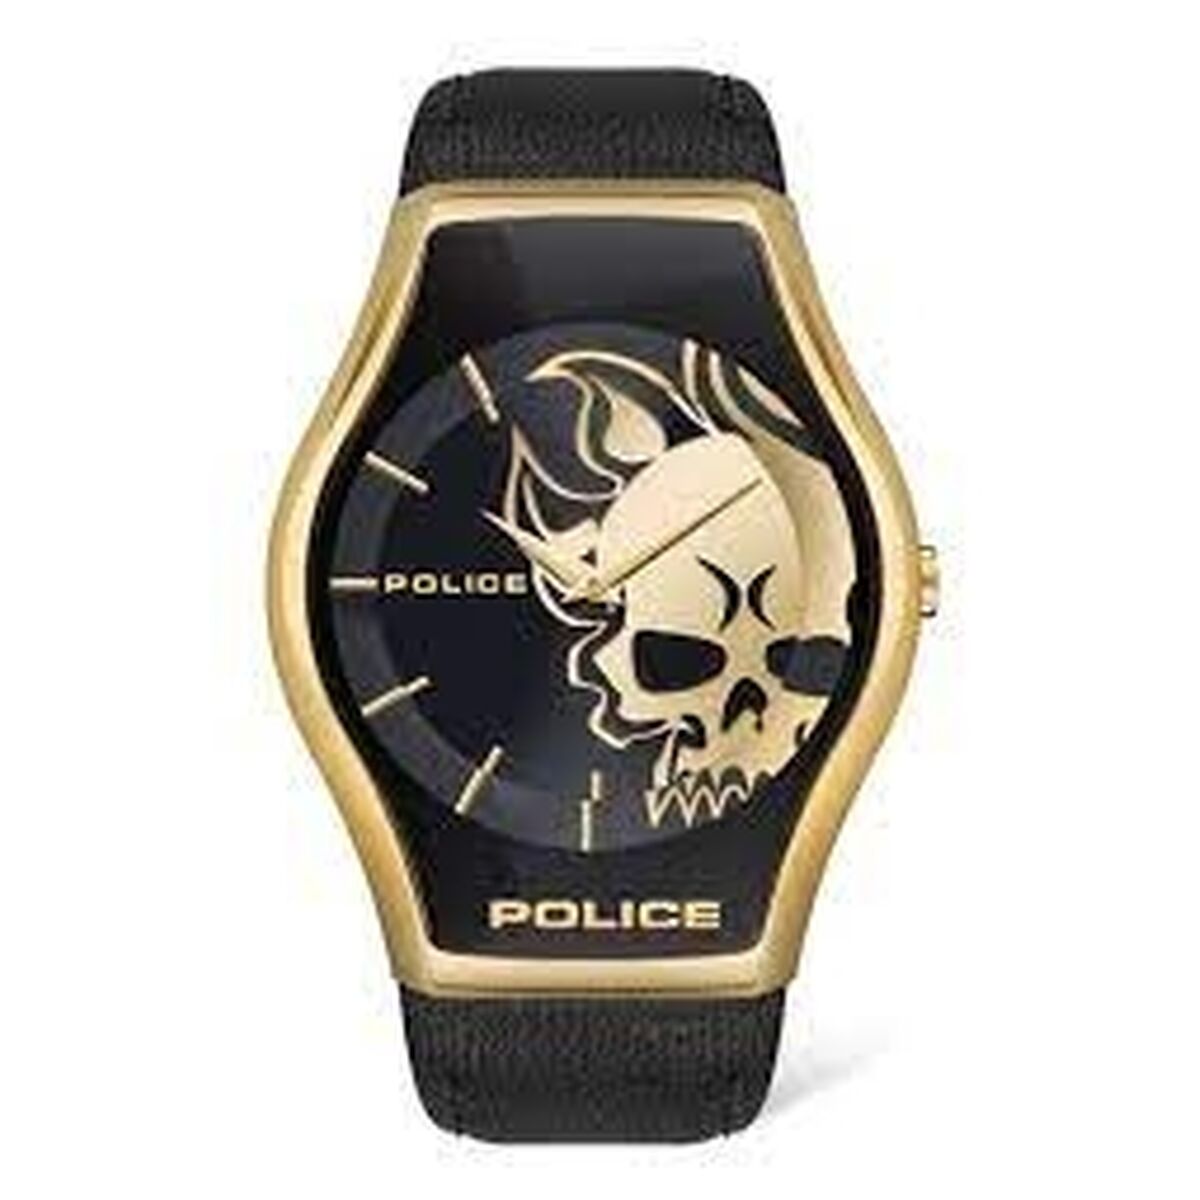 Men's Watch Police (Ø 45 mm), Police, Watches, Men, mens-watch-police-o-45-mm-1, Brand_Police, category-reference-2570, category-reference-2635, category-reference-2994, category-reference-2996, category-reference-t-19667, category-reference-t-19724, category-reference-t-20349, Condition_NEW, fashion, original gifts, Price_100 - 200, RiotNook